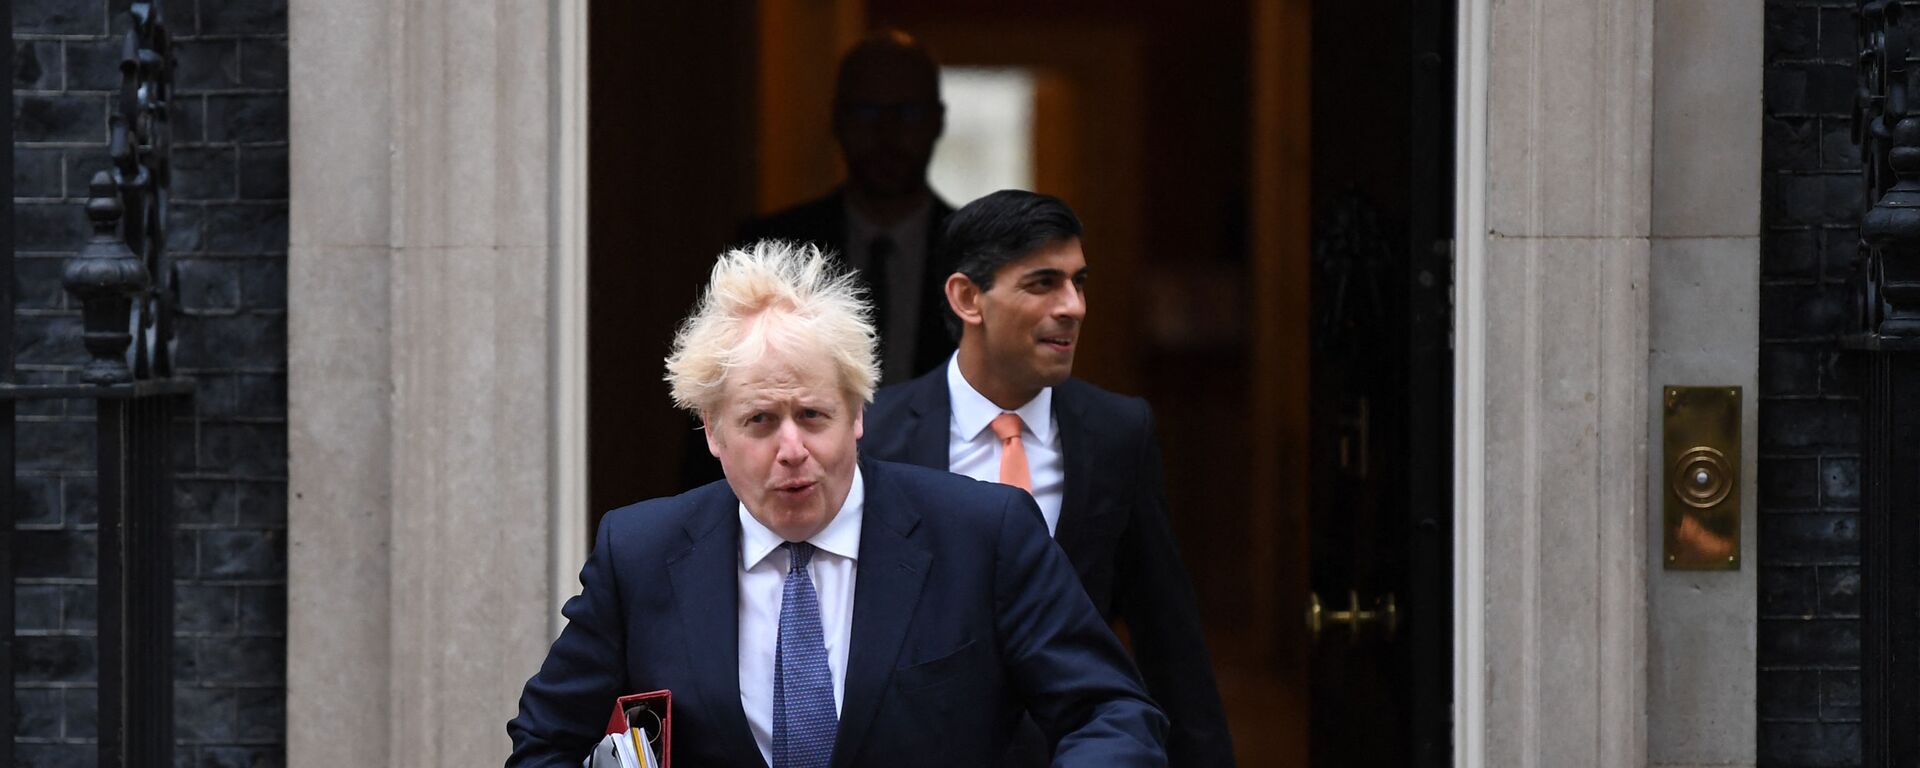 Britain's Prime Minister Boris Johnson (L) and Britain's Chancellor of the Exchequer Rishi Sunak (R) leave 10 Downing Street to attend the weekly cabinet meeting in London on October 13, 2020 held at the Foreign, Commonwealth and Development Office - Sputnik International, 1920, 05.07.2022